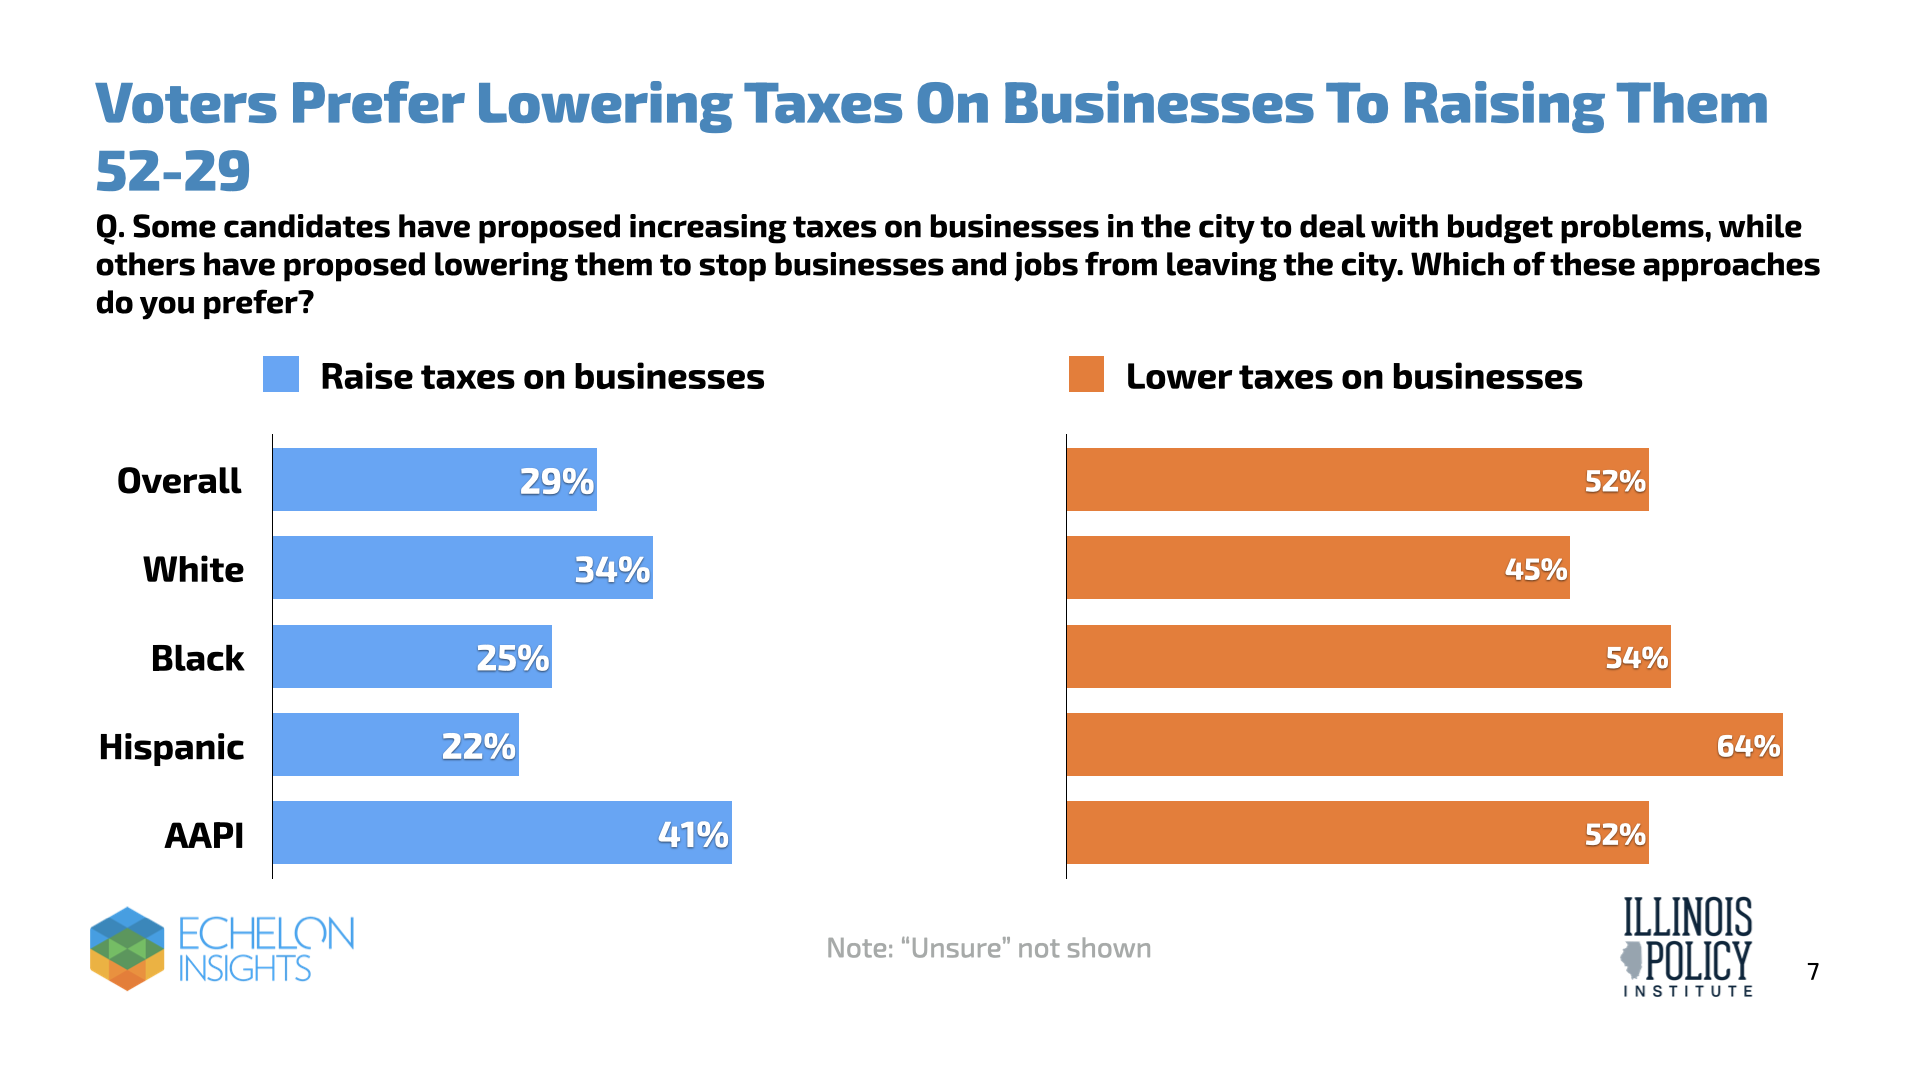 Voters prefer lowering taxes on businesses to raising them 52-29